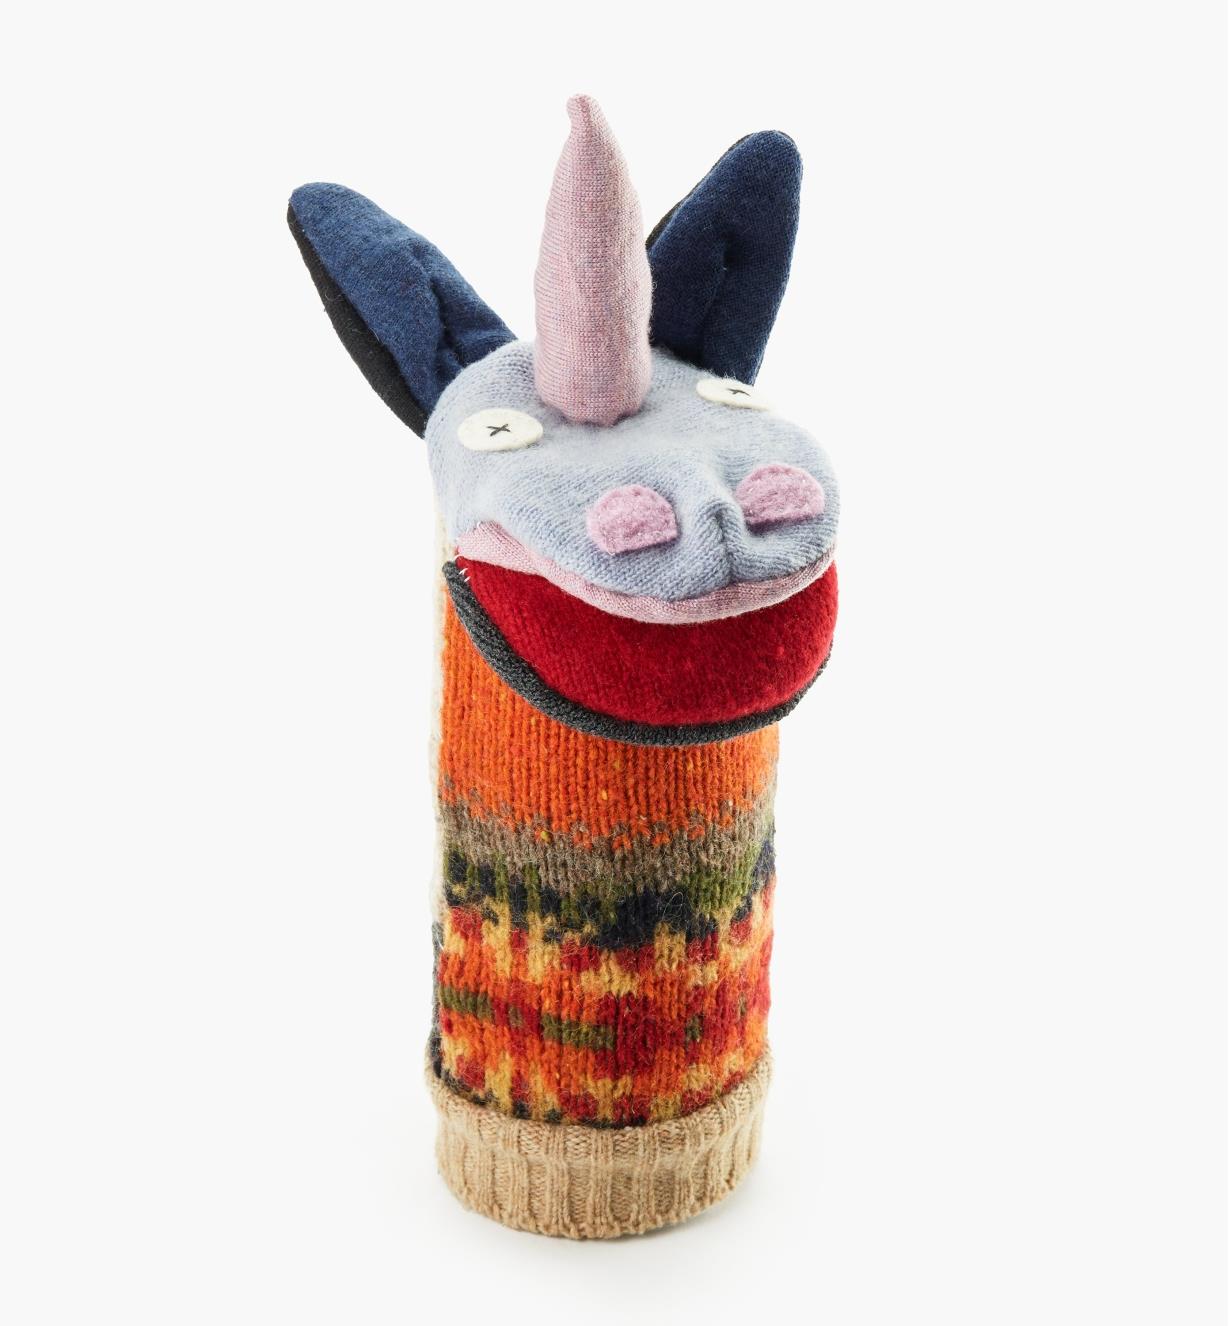 A completed unicorn puppet fitted over its canister, which is used as a display stand